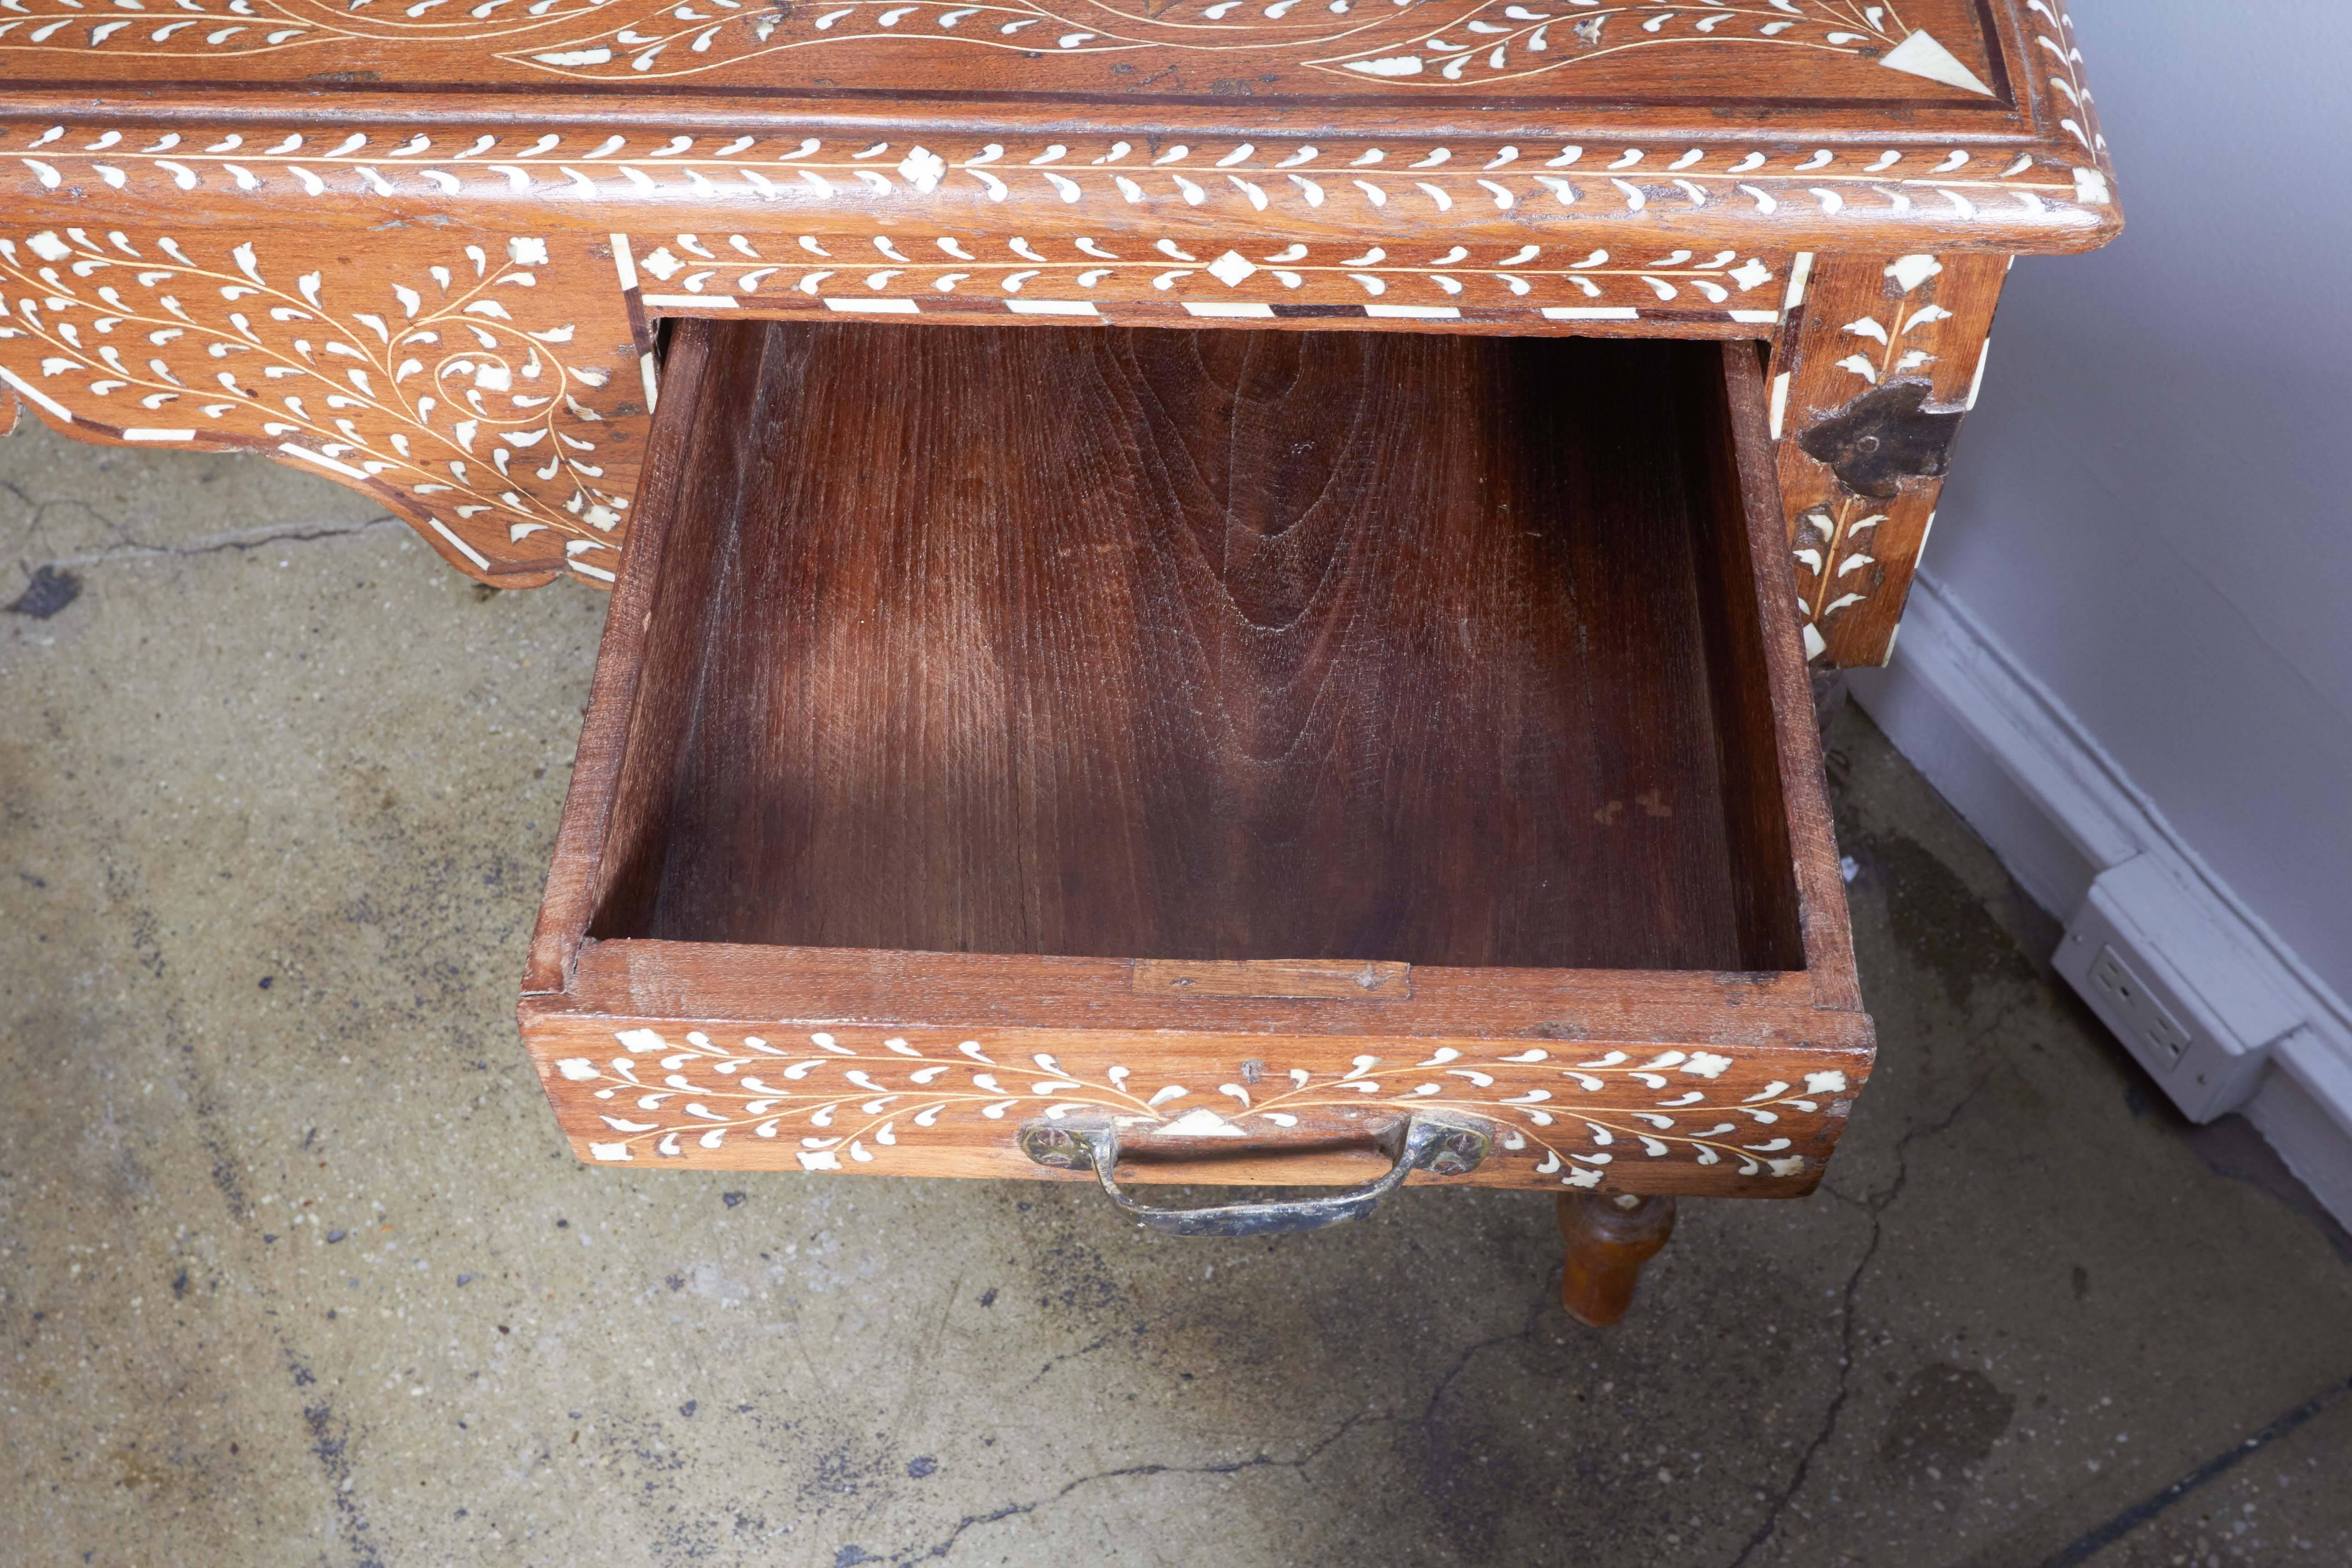 A large desk with two drawers, turned legs and bone inlay in a Classic pattern on all sides, from India. Brass handles and corner trim.